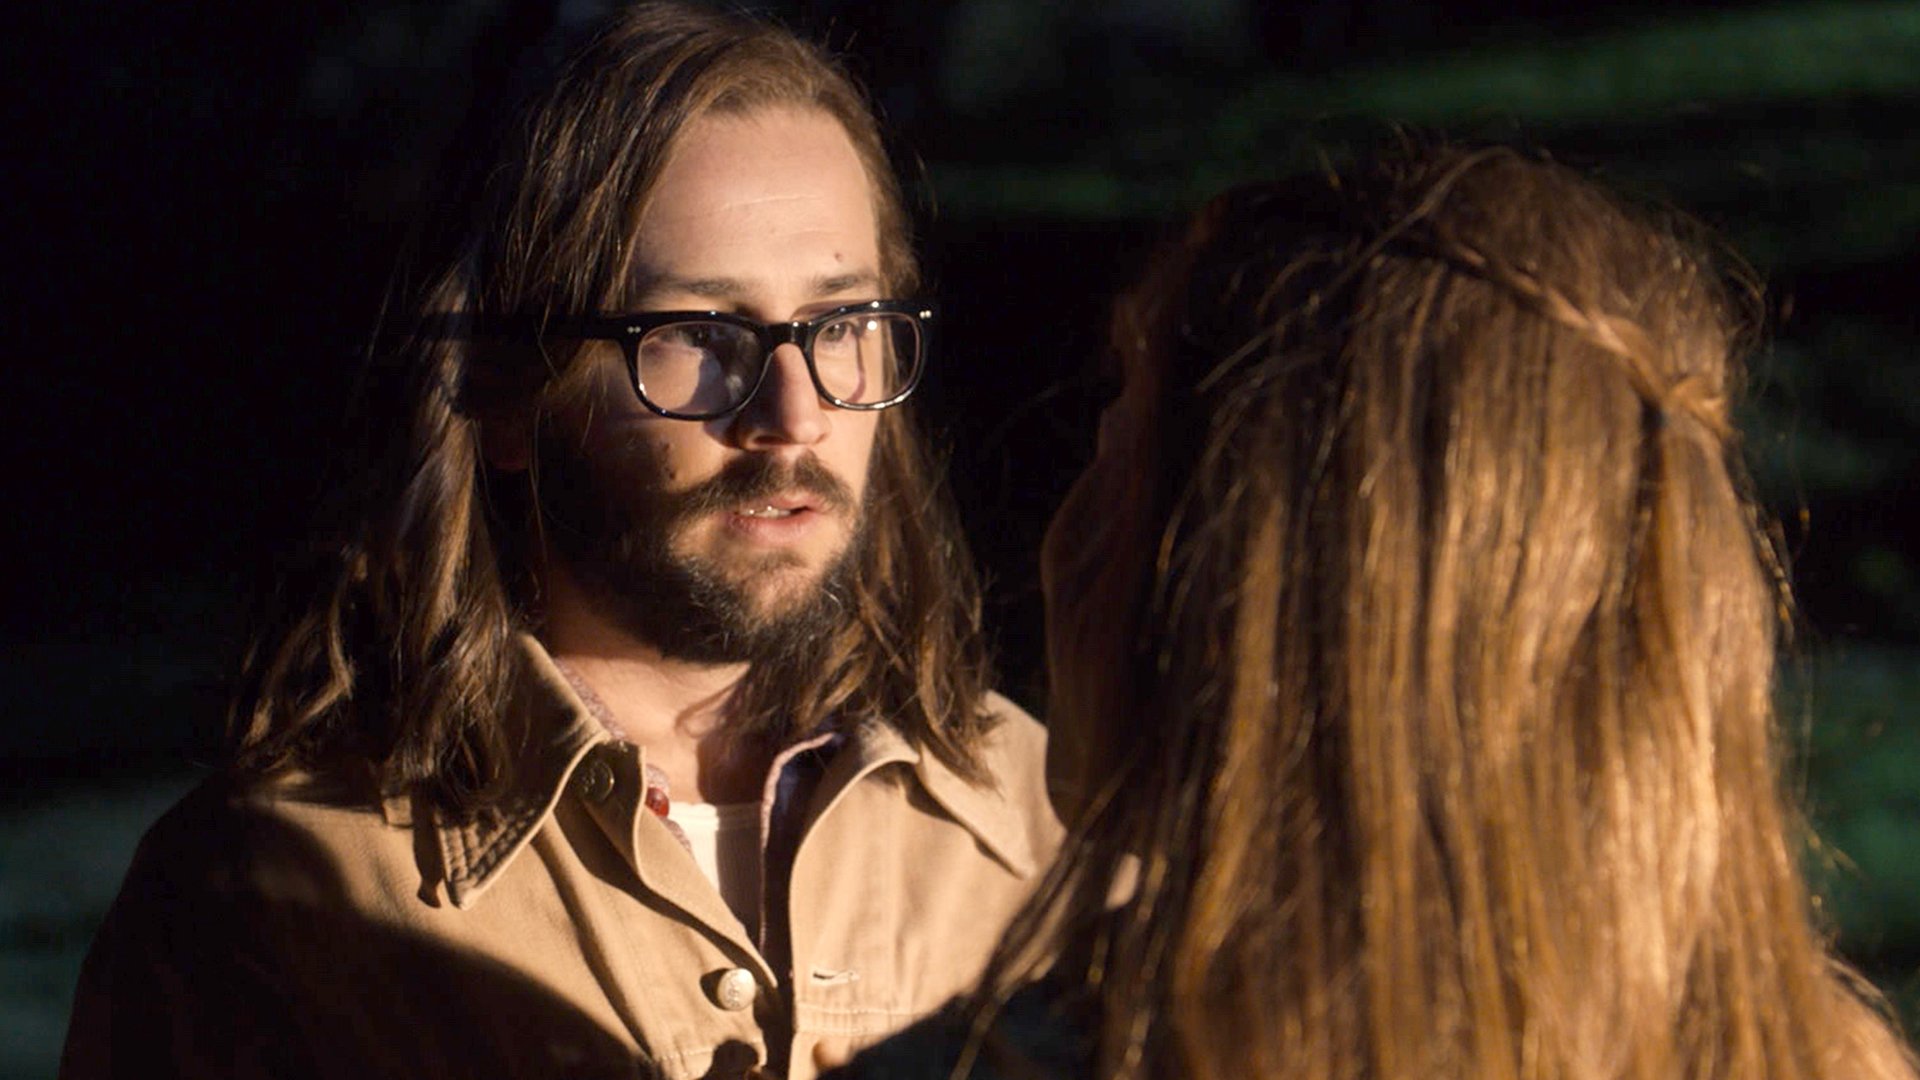 Michael Angarano as Nicky staring at Genevieve Angelson as Sally in ‘This Is Us’ Season 5 Episode 11, ‘One Small Step’